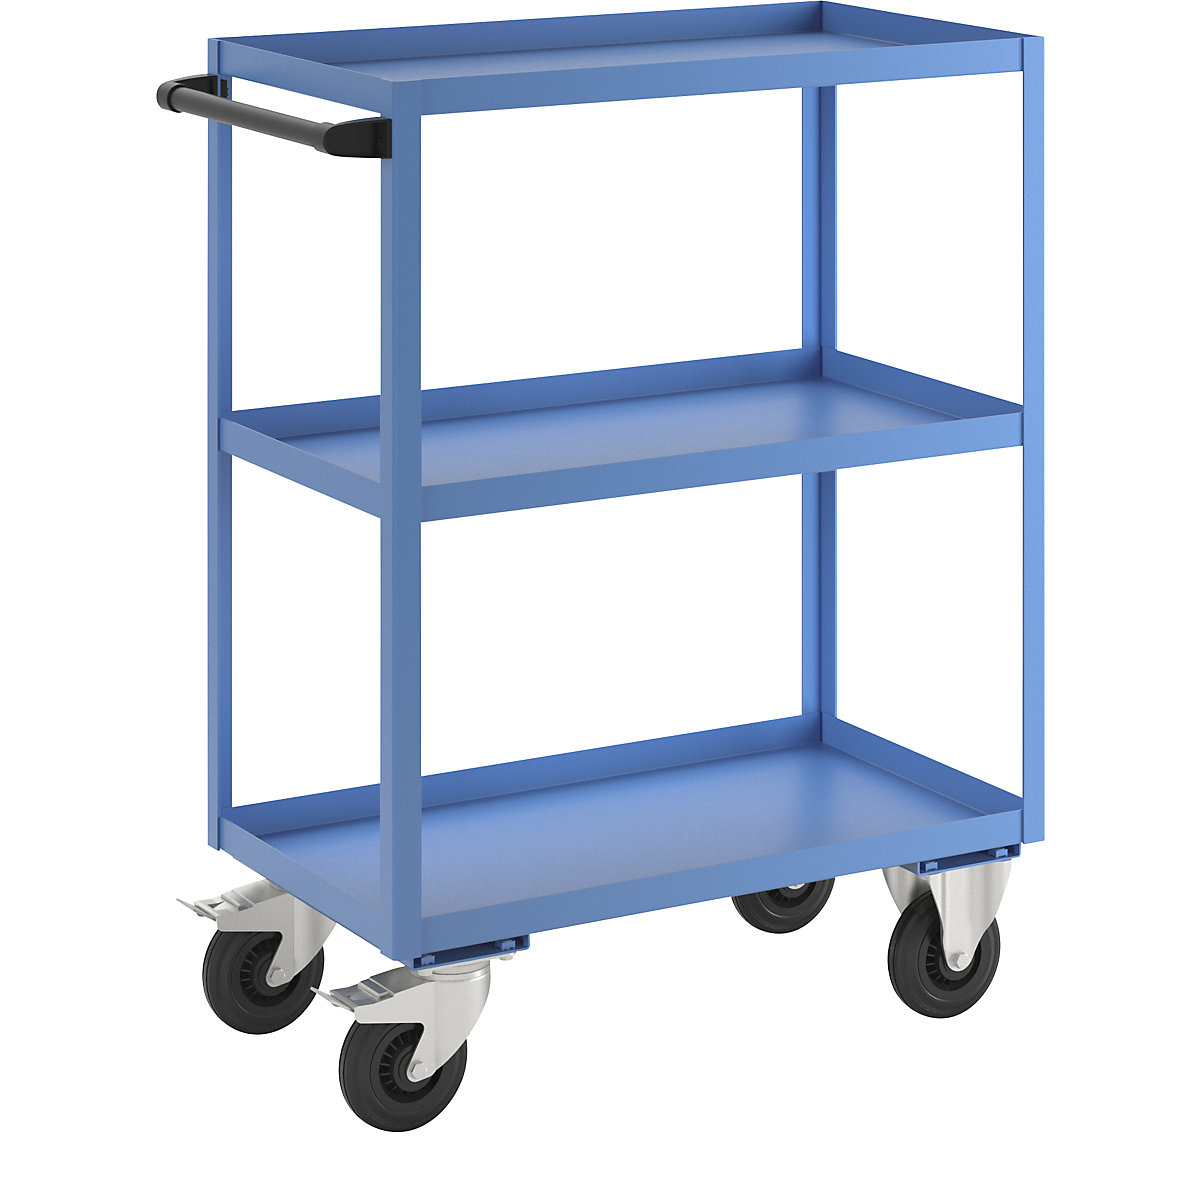 General purpose trolley – eurokraft pro, 3 shelves, max. load 350 kg, overall height 1215 mm, light blue-9